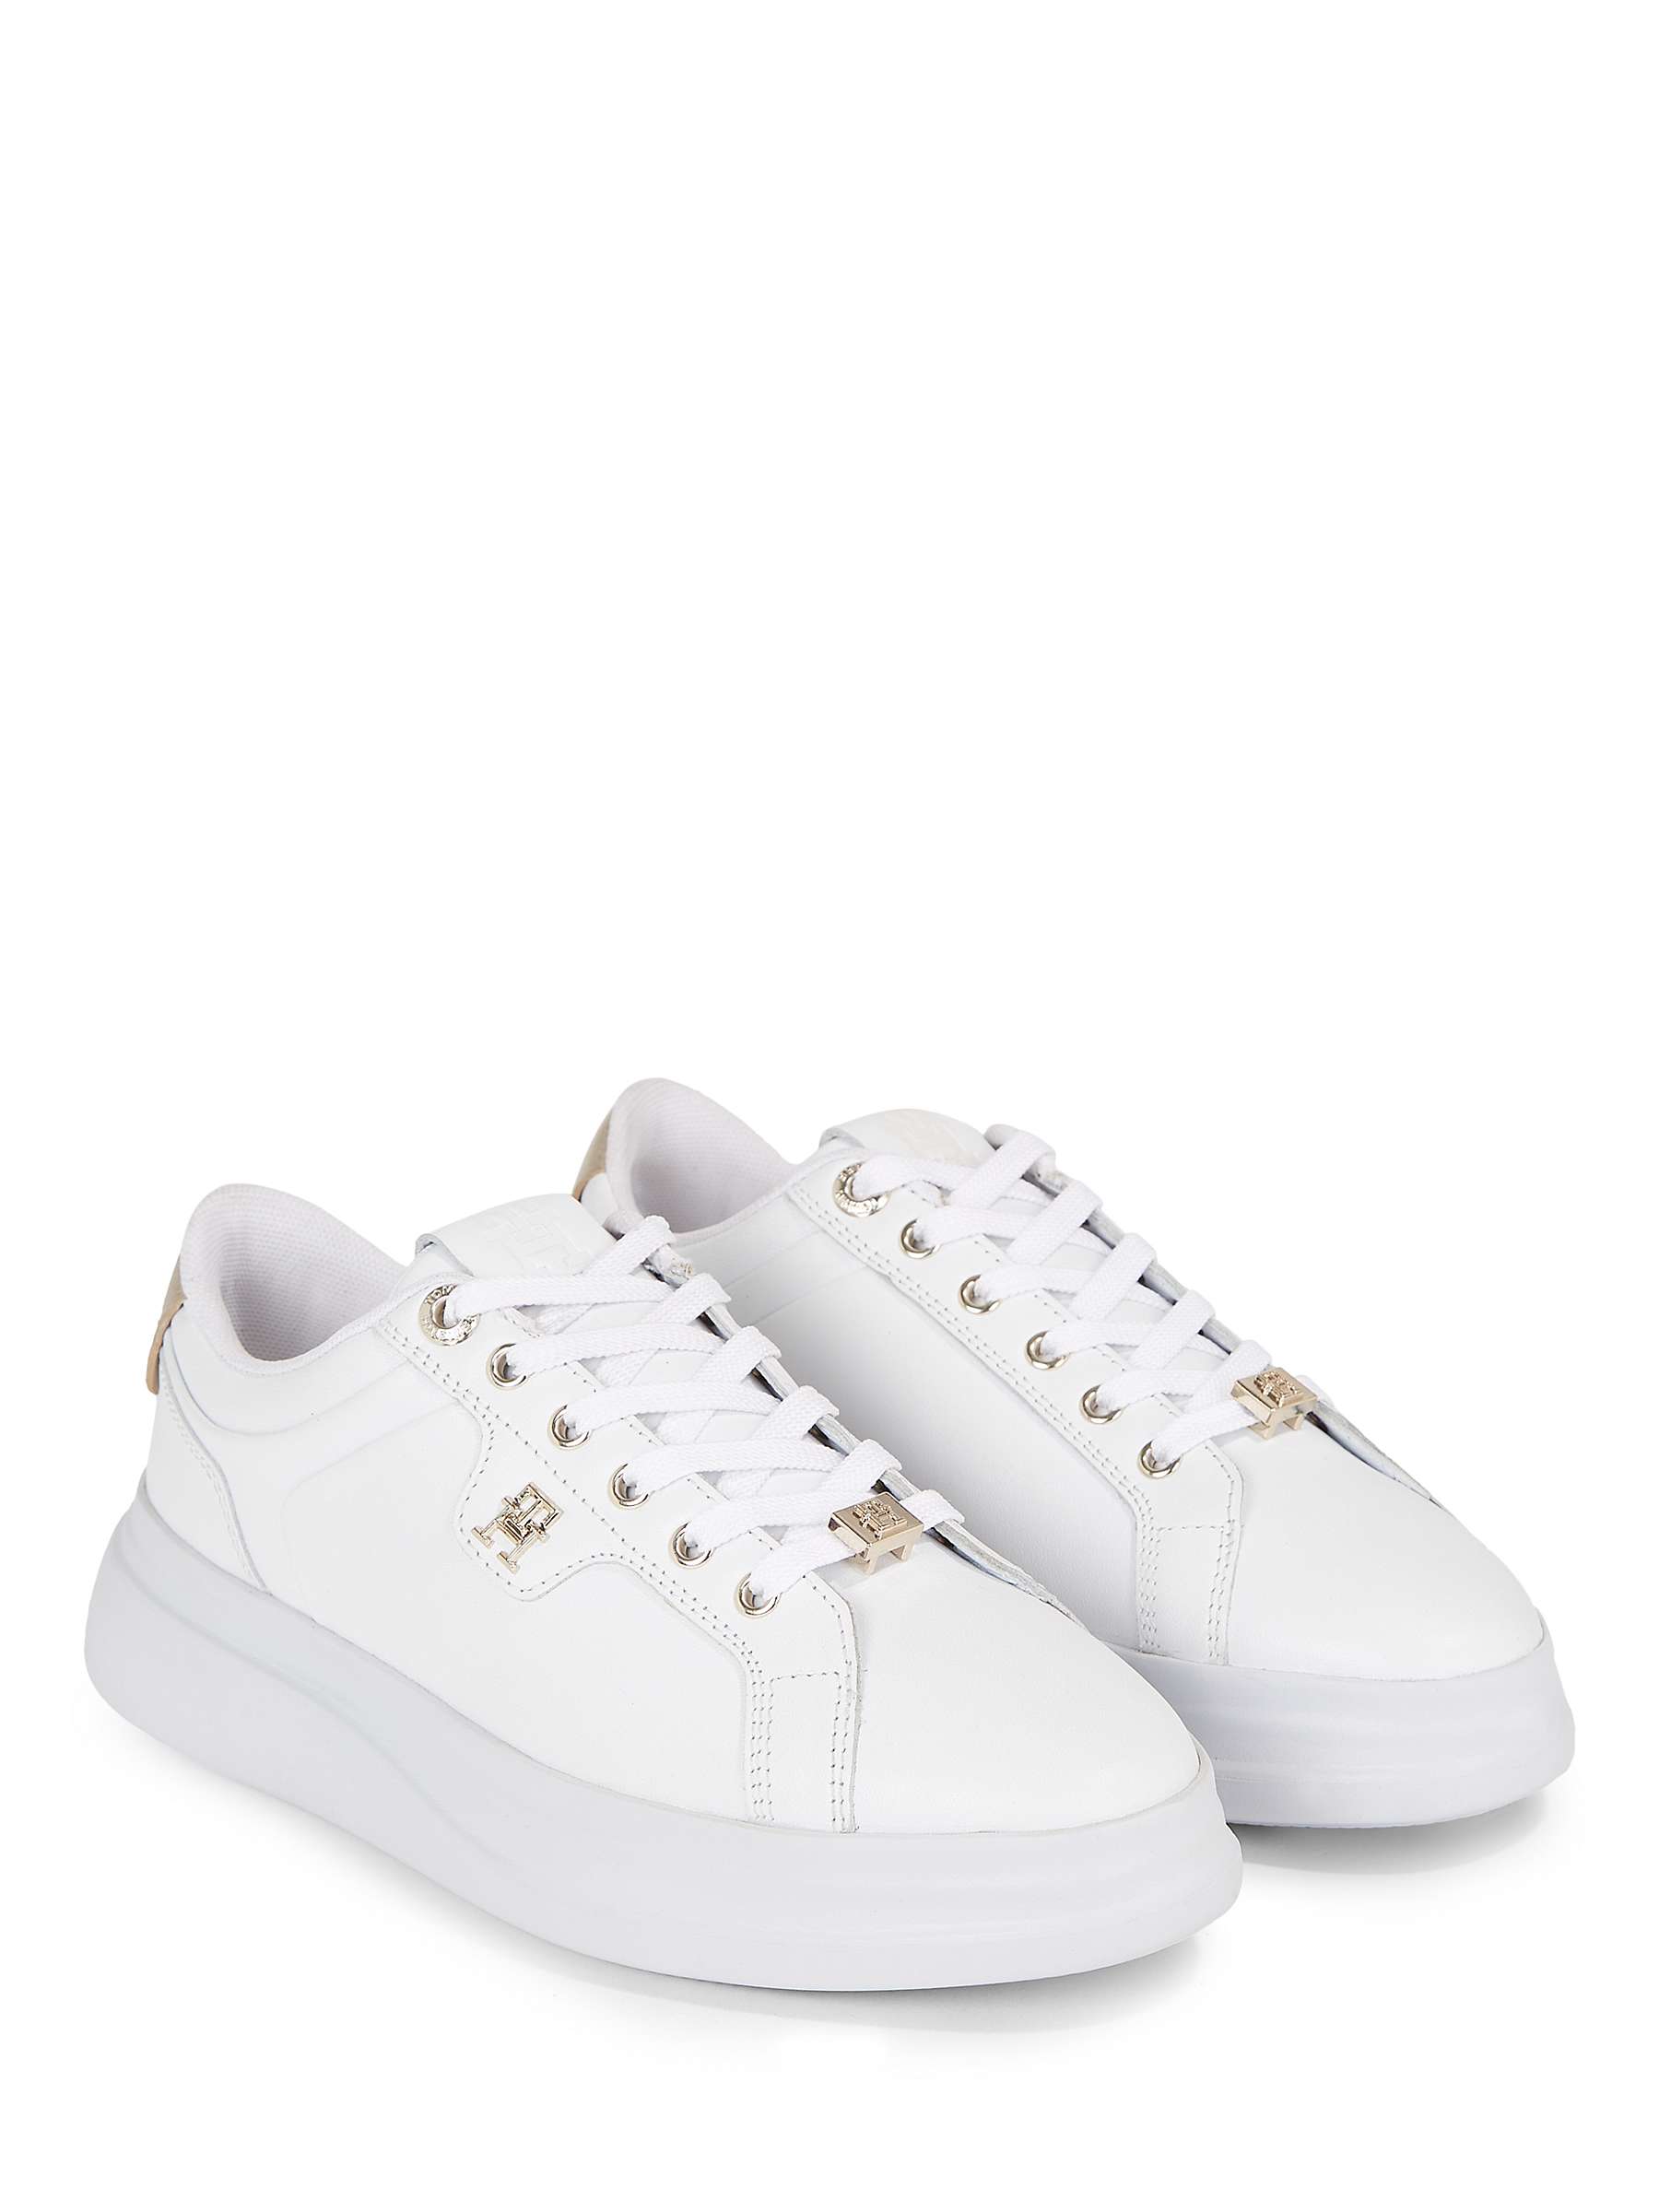 Buy Tommy Hilfiger Leather Lace-Up Flatform Trainers Online at johnlewis.com